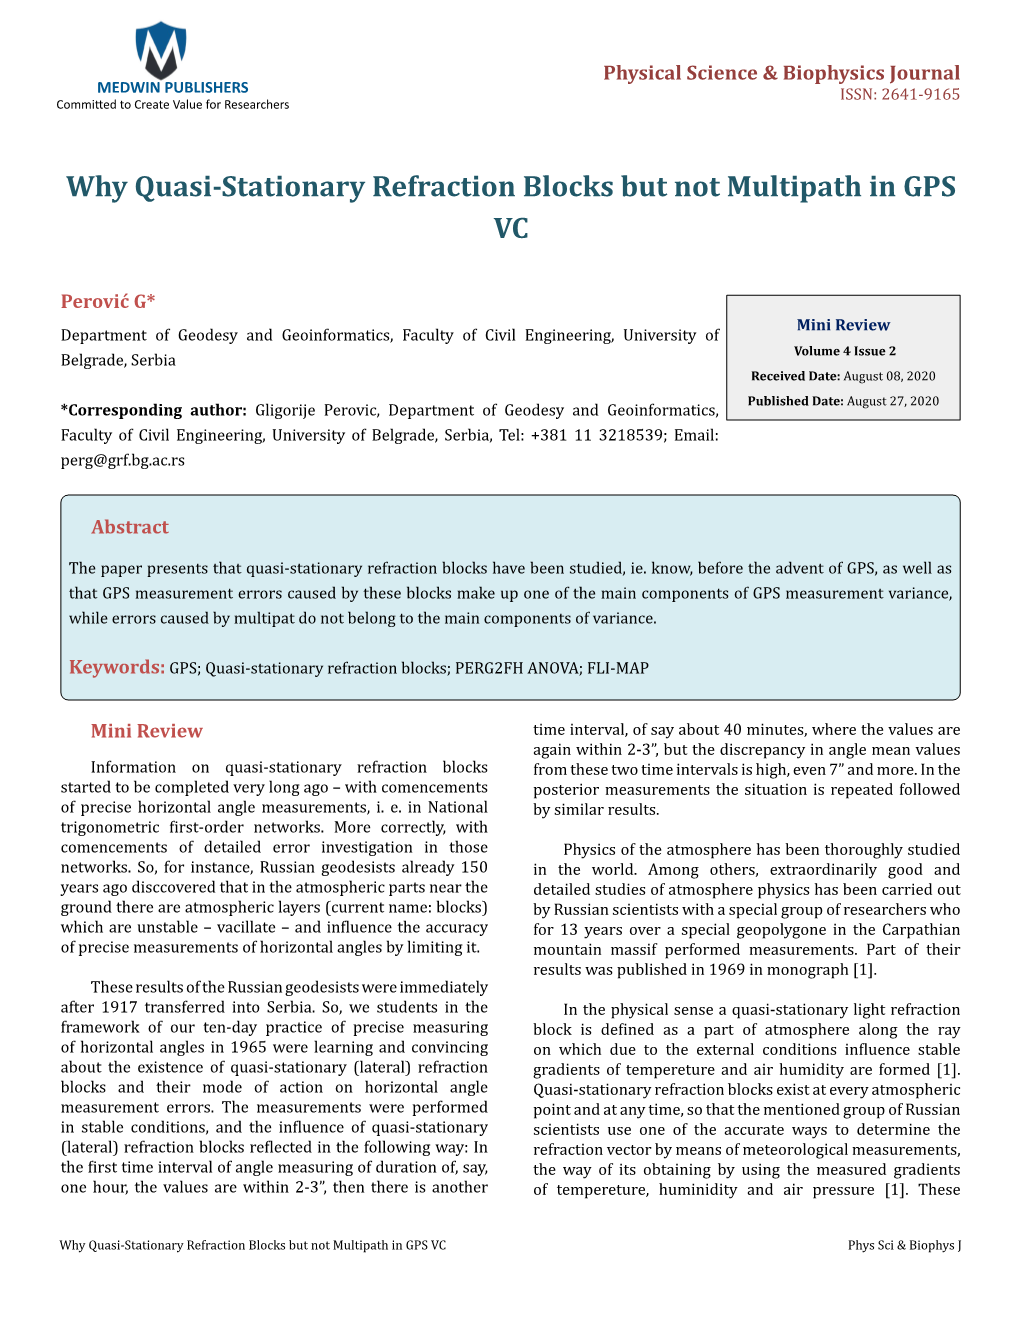 Why Quasi-Stationary Refraction Blocks but Not Multipath in GPS VC